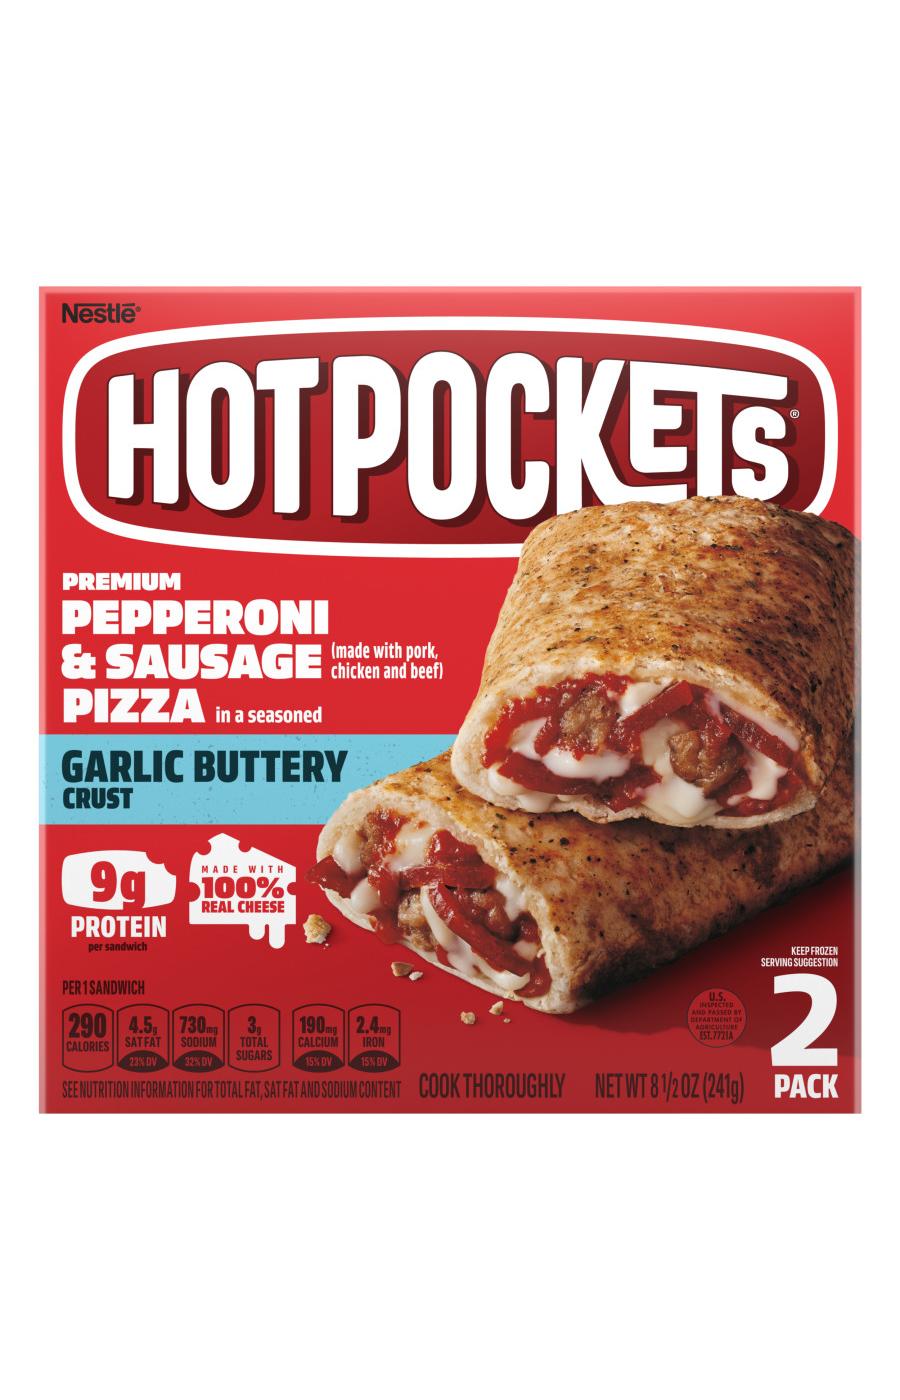 Hot Pockets Pepperoni & Sausage Pizza Frozen Sandwiches; image 1 of 4